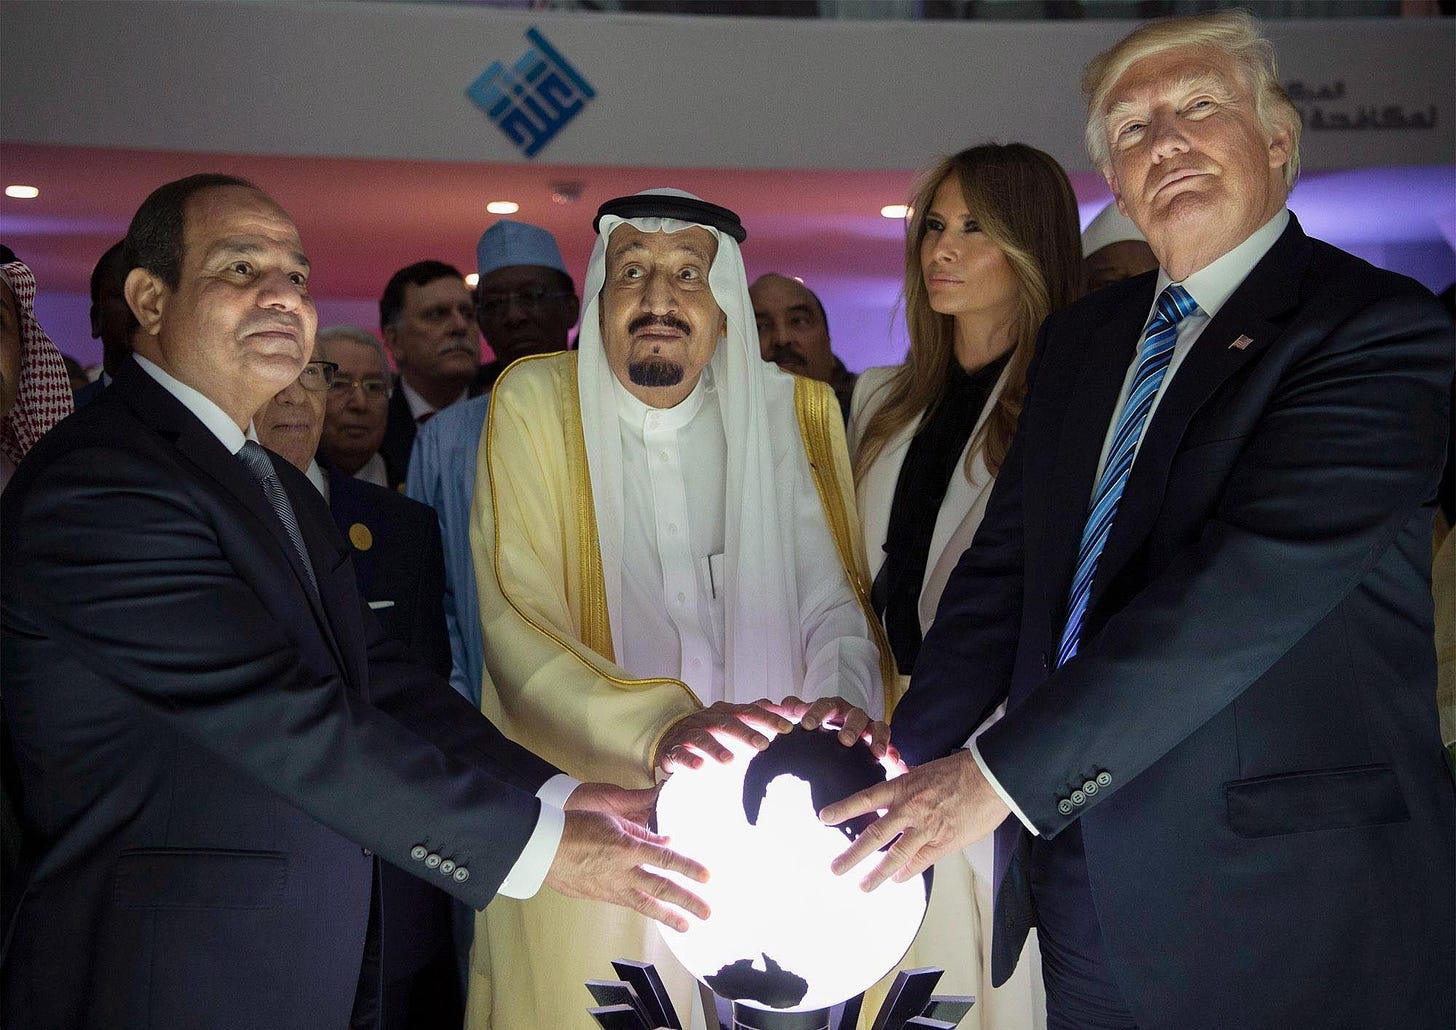 What Was That Glowing Orb Trump Touched in Saudi Arabia? - The New York  Times